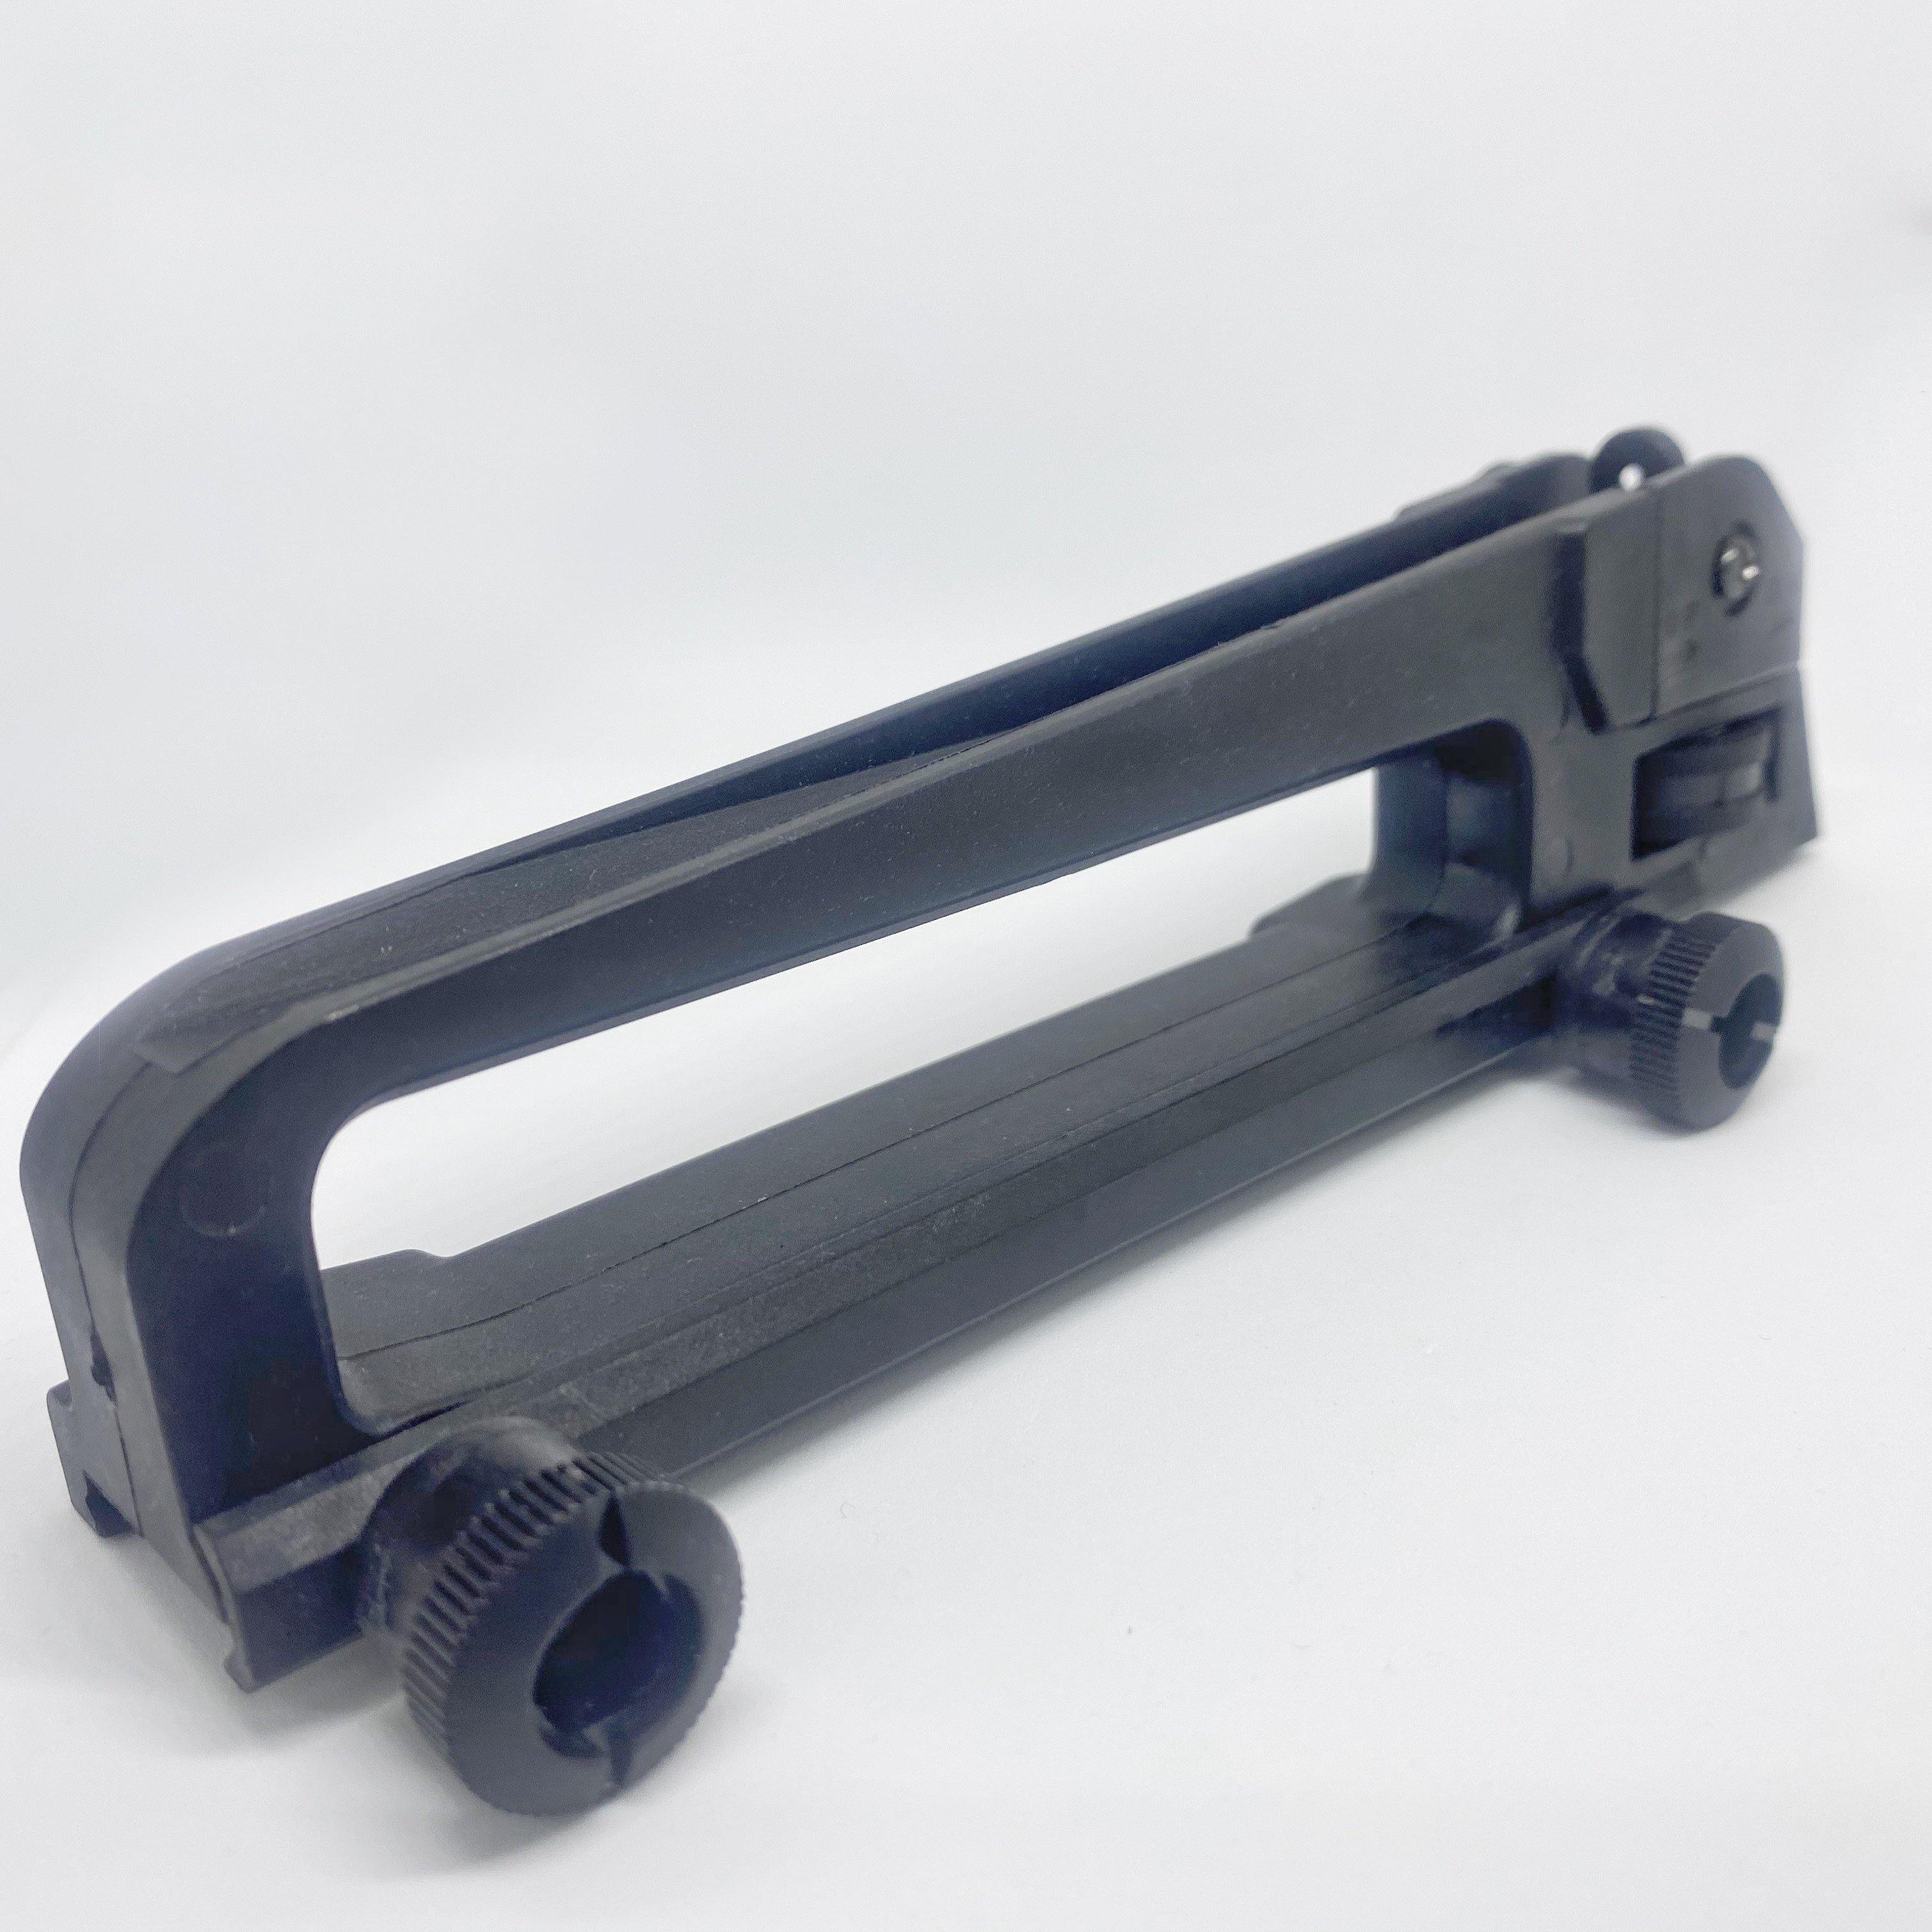 Polymer M16/M4 Rail Mounted Carrying Handle